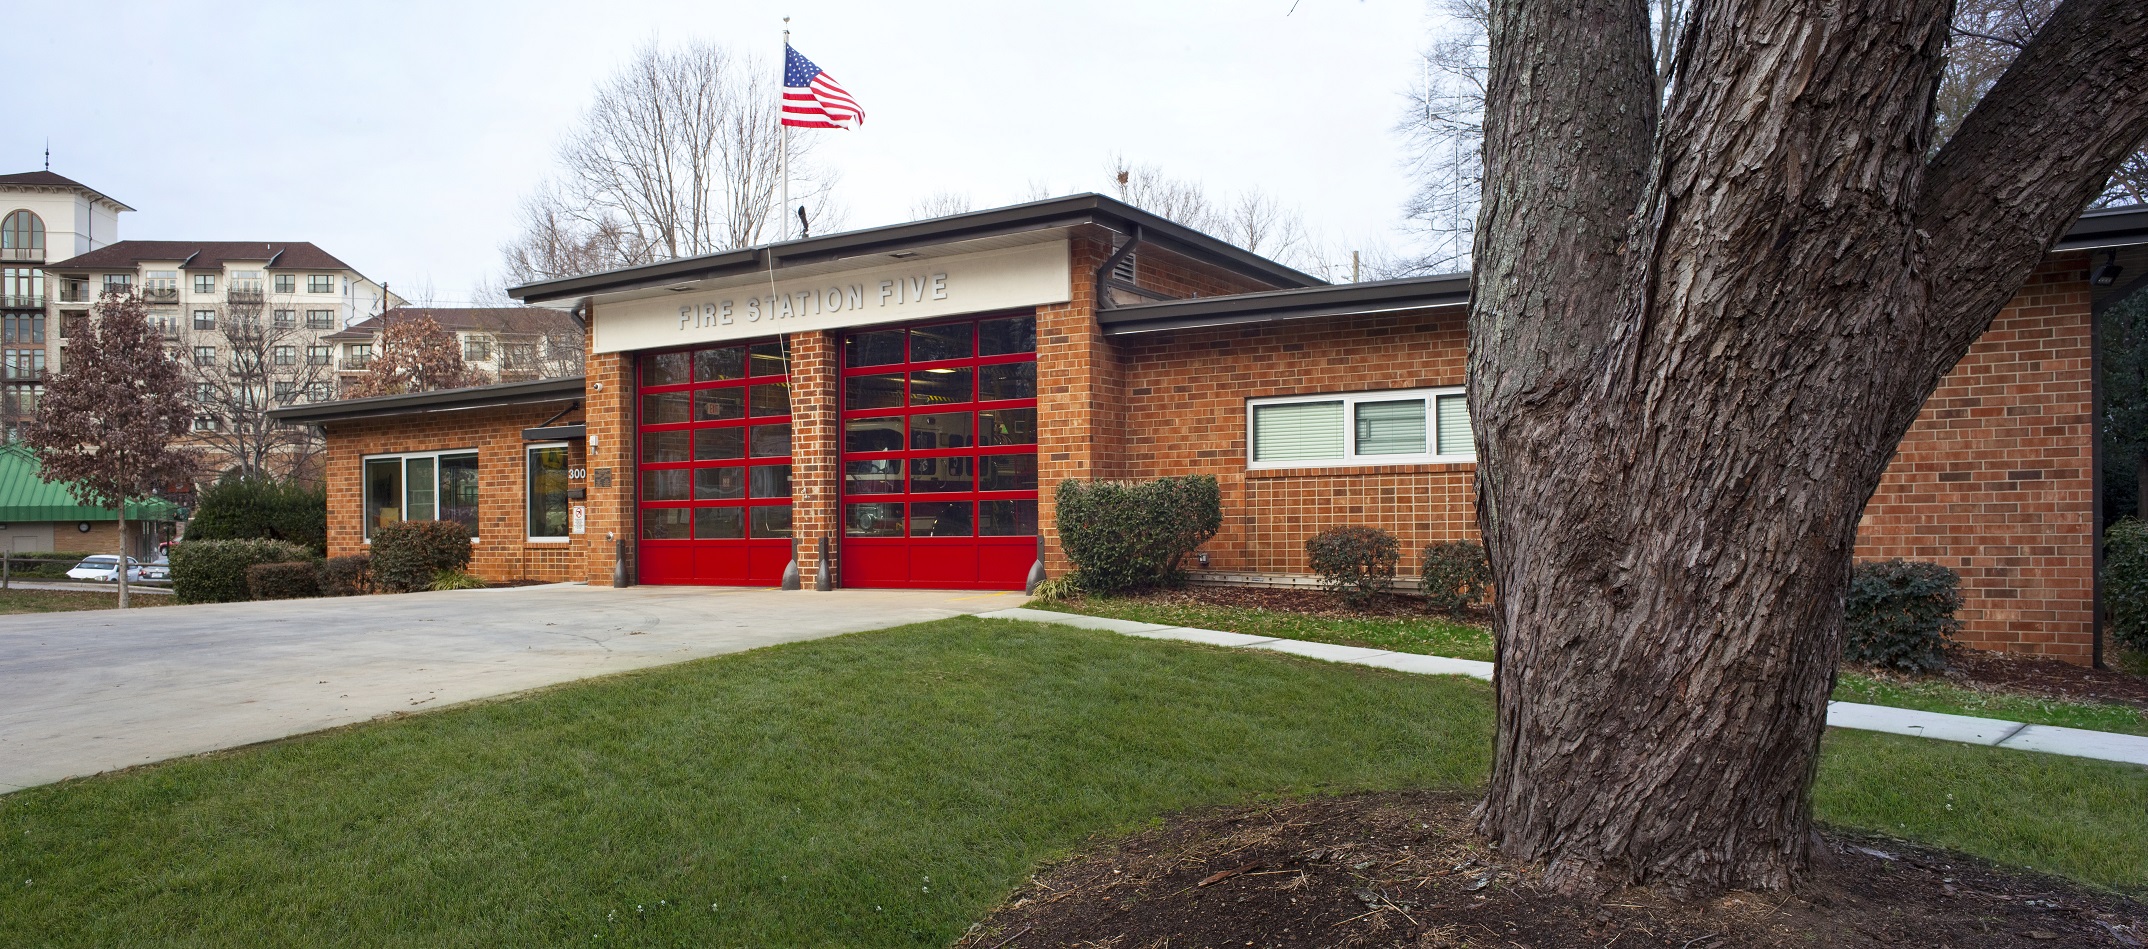 Raleigh Fire Station No. 5